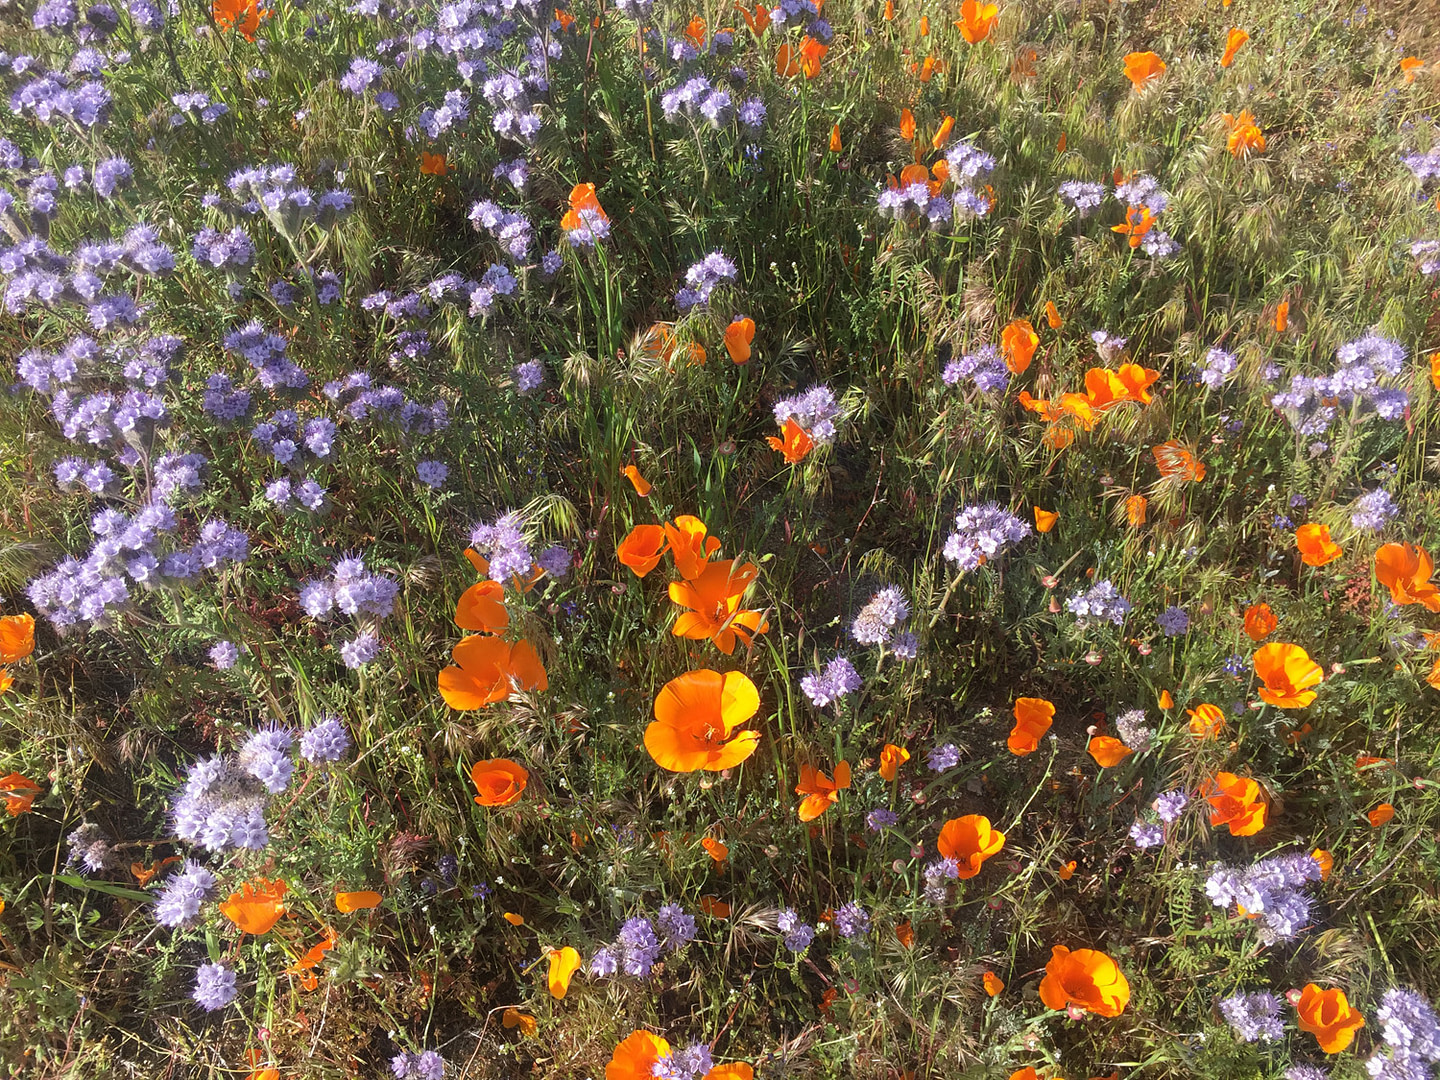 Poppies and Phacelia in the Antelope Valley